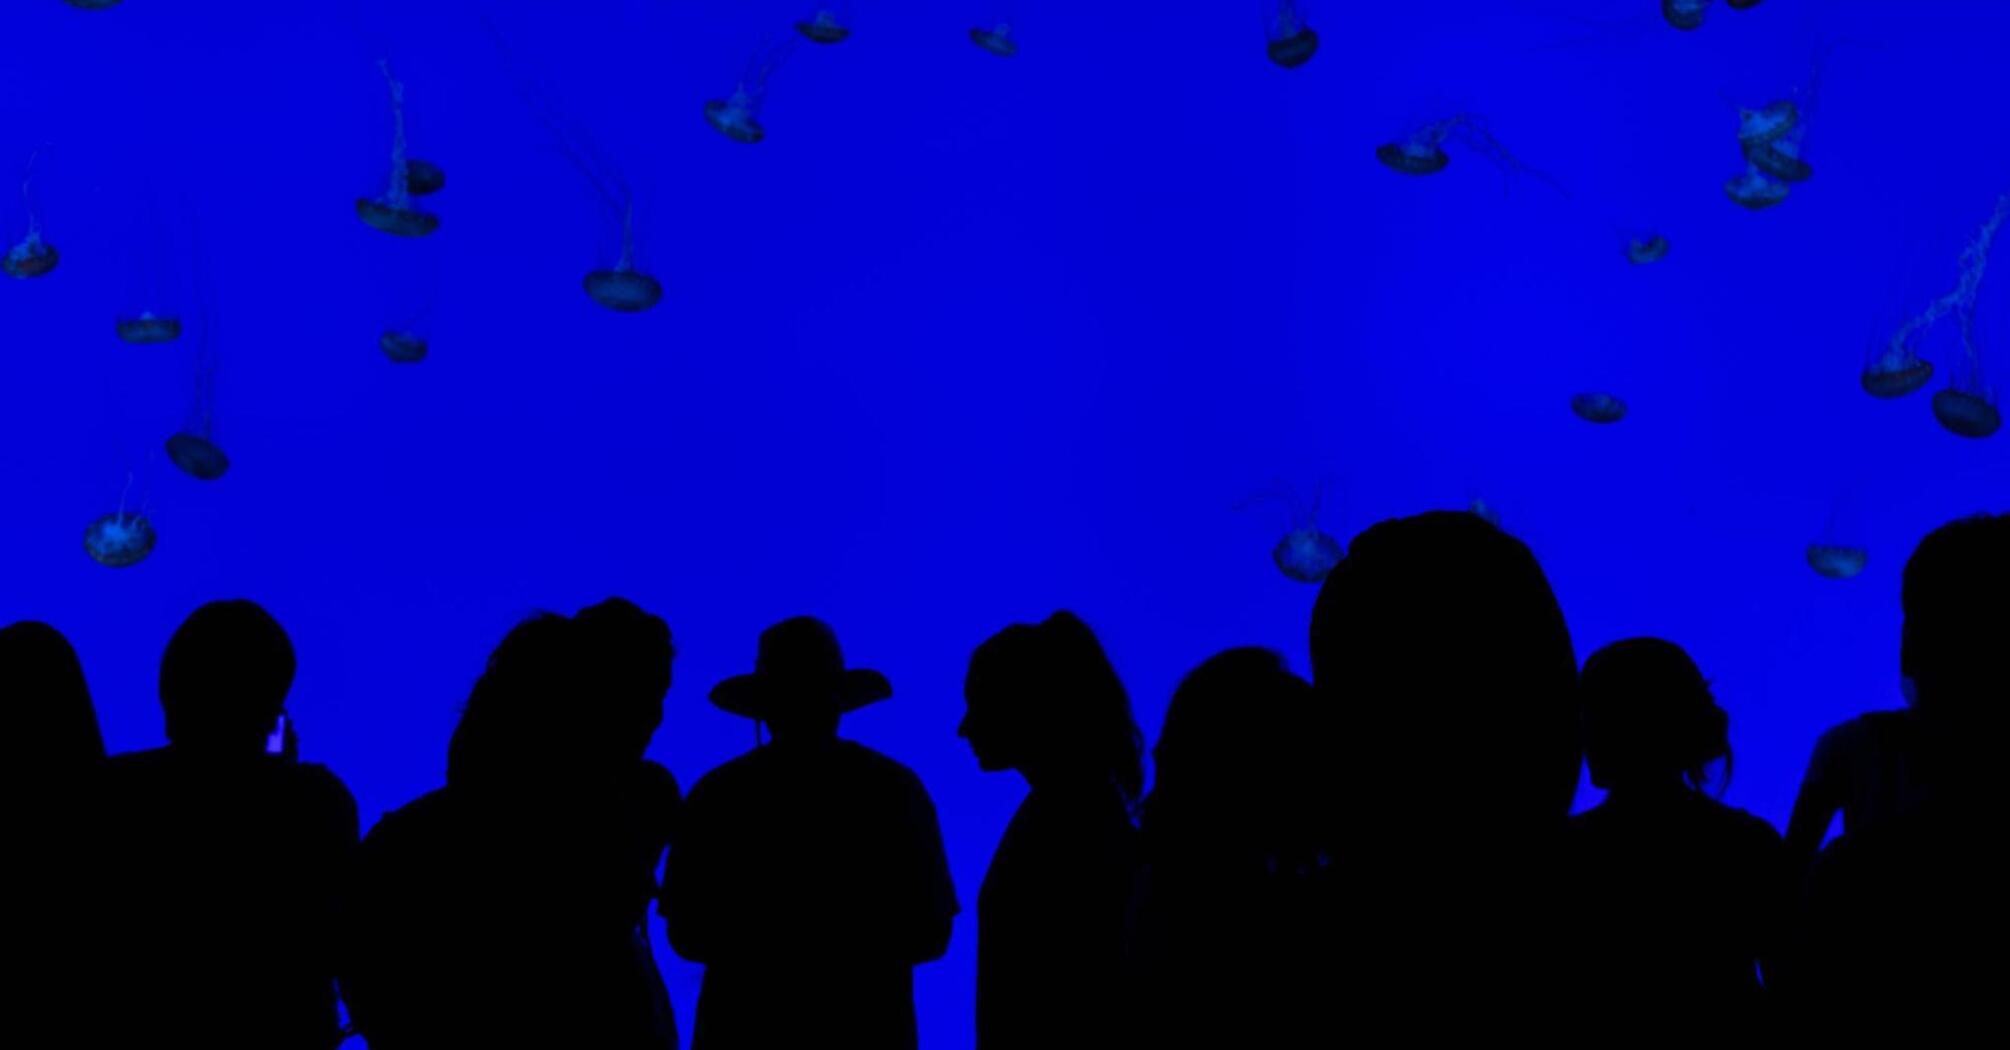 A group of people looking at jellyfishes behind glass